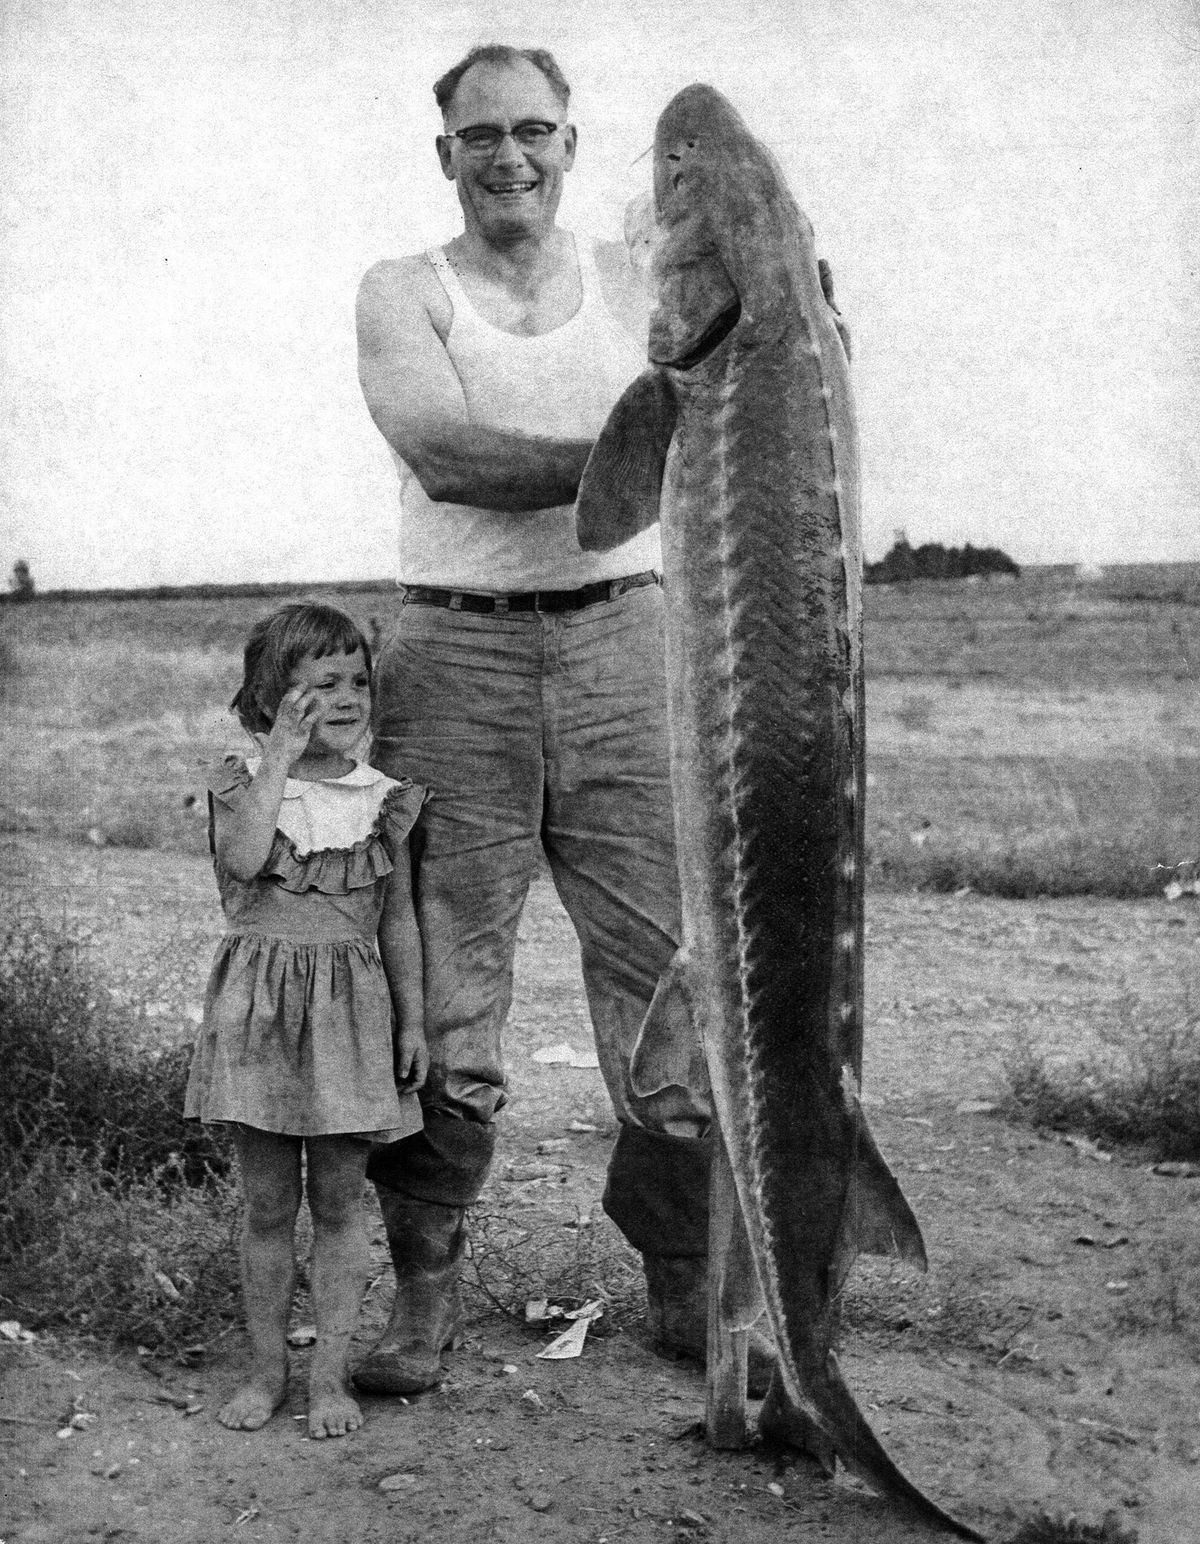 Deborah Clark as a young girl with her uncle on the shores of the Columbia River.